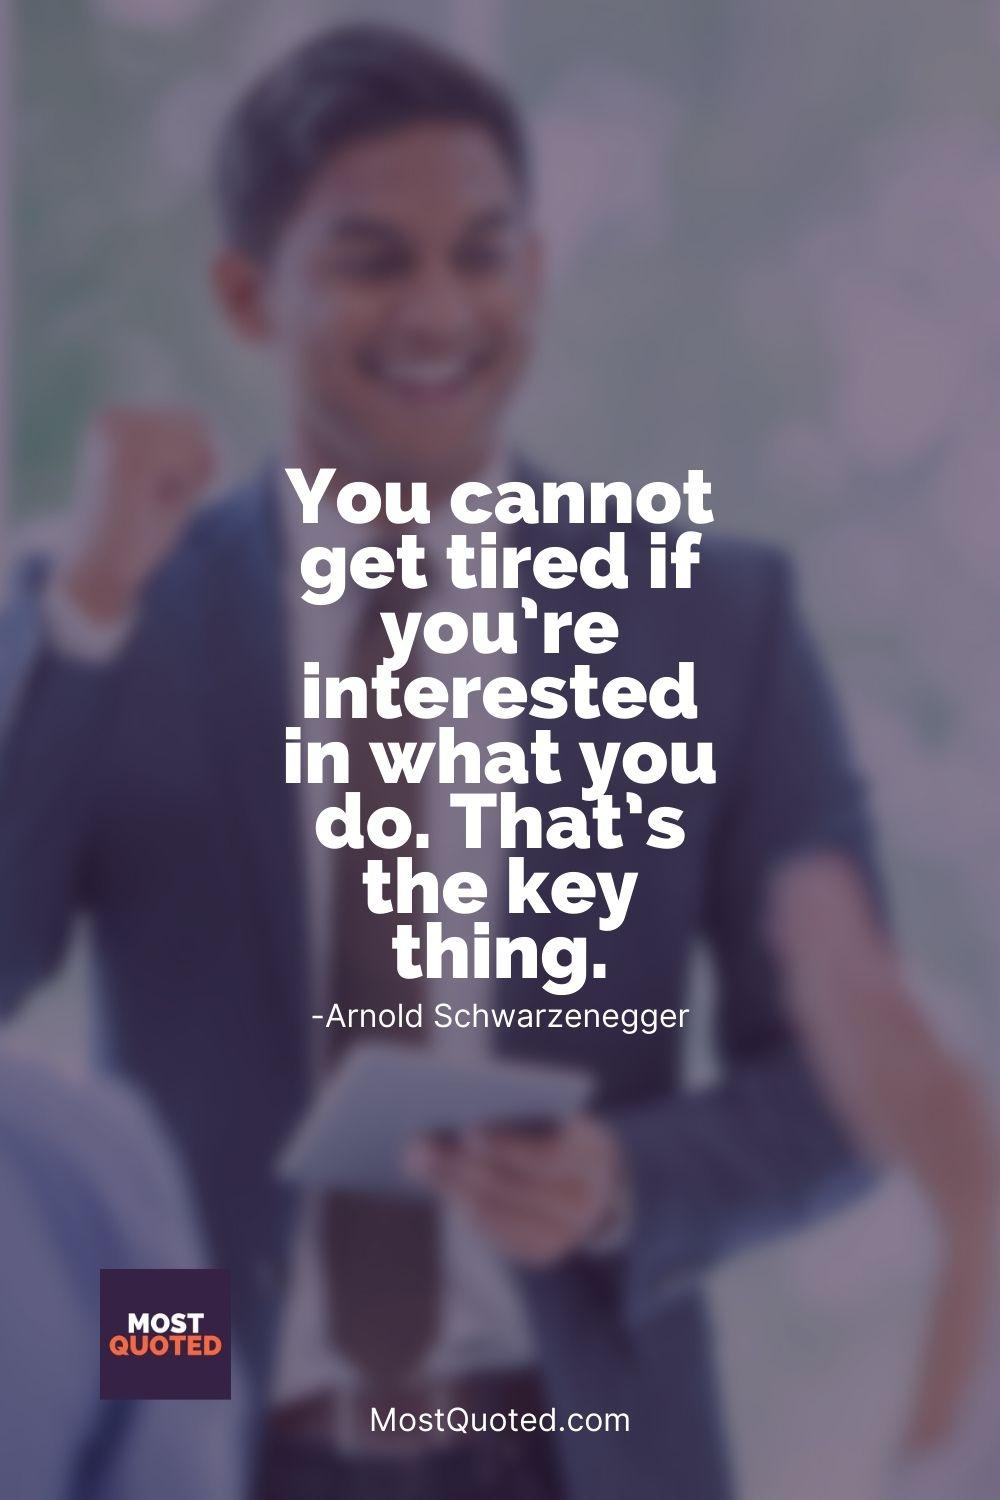 You cannot get tired if you’re interested in what you do. That’s the key thing. - Arnold Schwarzenegger